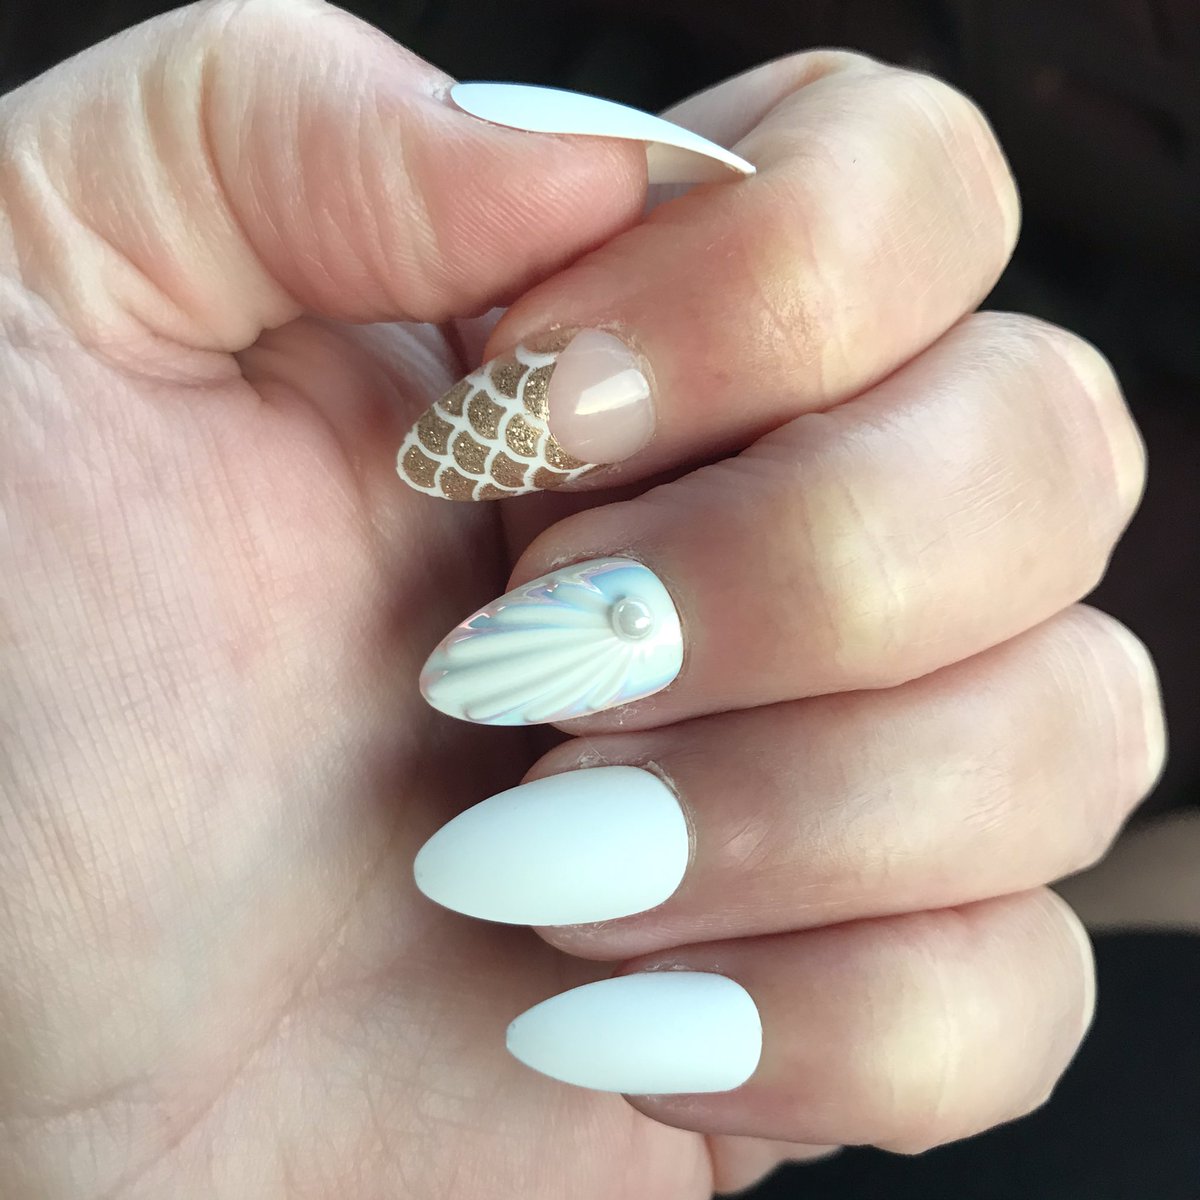 Been doing my own nails lately & I am LOVING 💕 this set & the fact that I got 2 uses out of one pack ... #winning #mermaid 🧜‍♀️ #diymani #selfcare #ManiMonday #KissNails #budgetfriendly #summer #nails